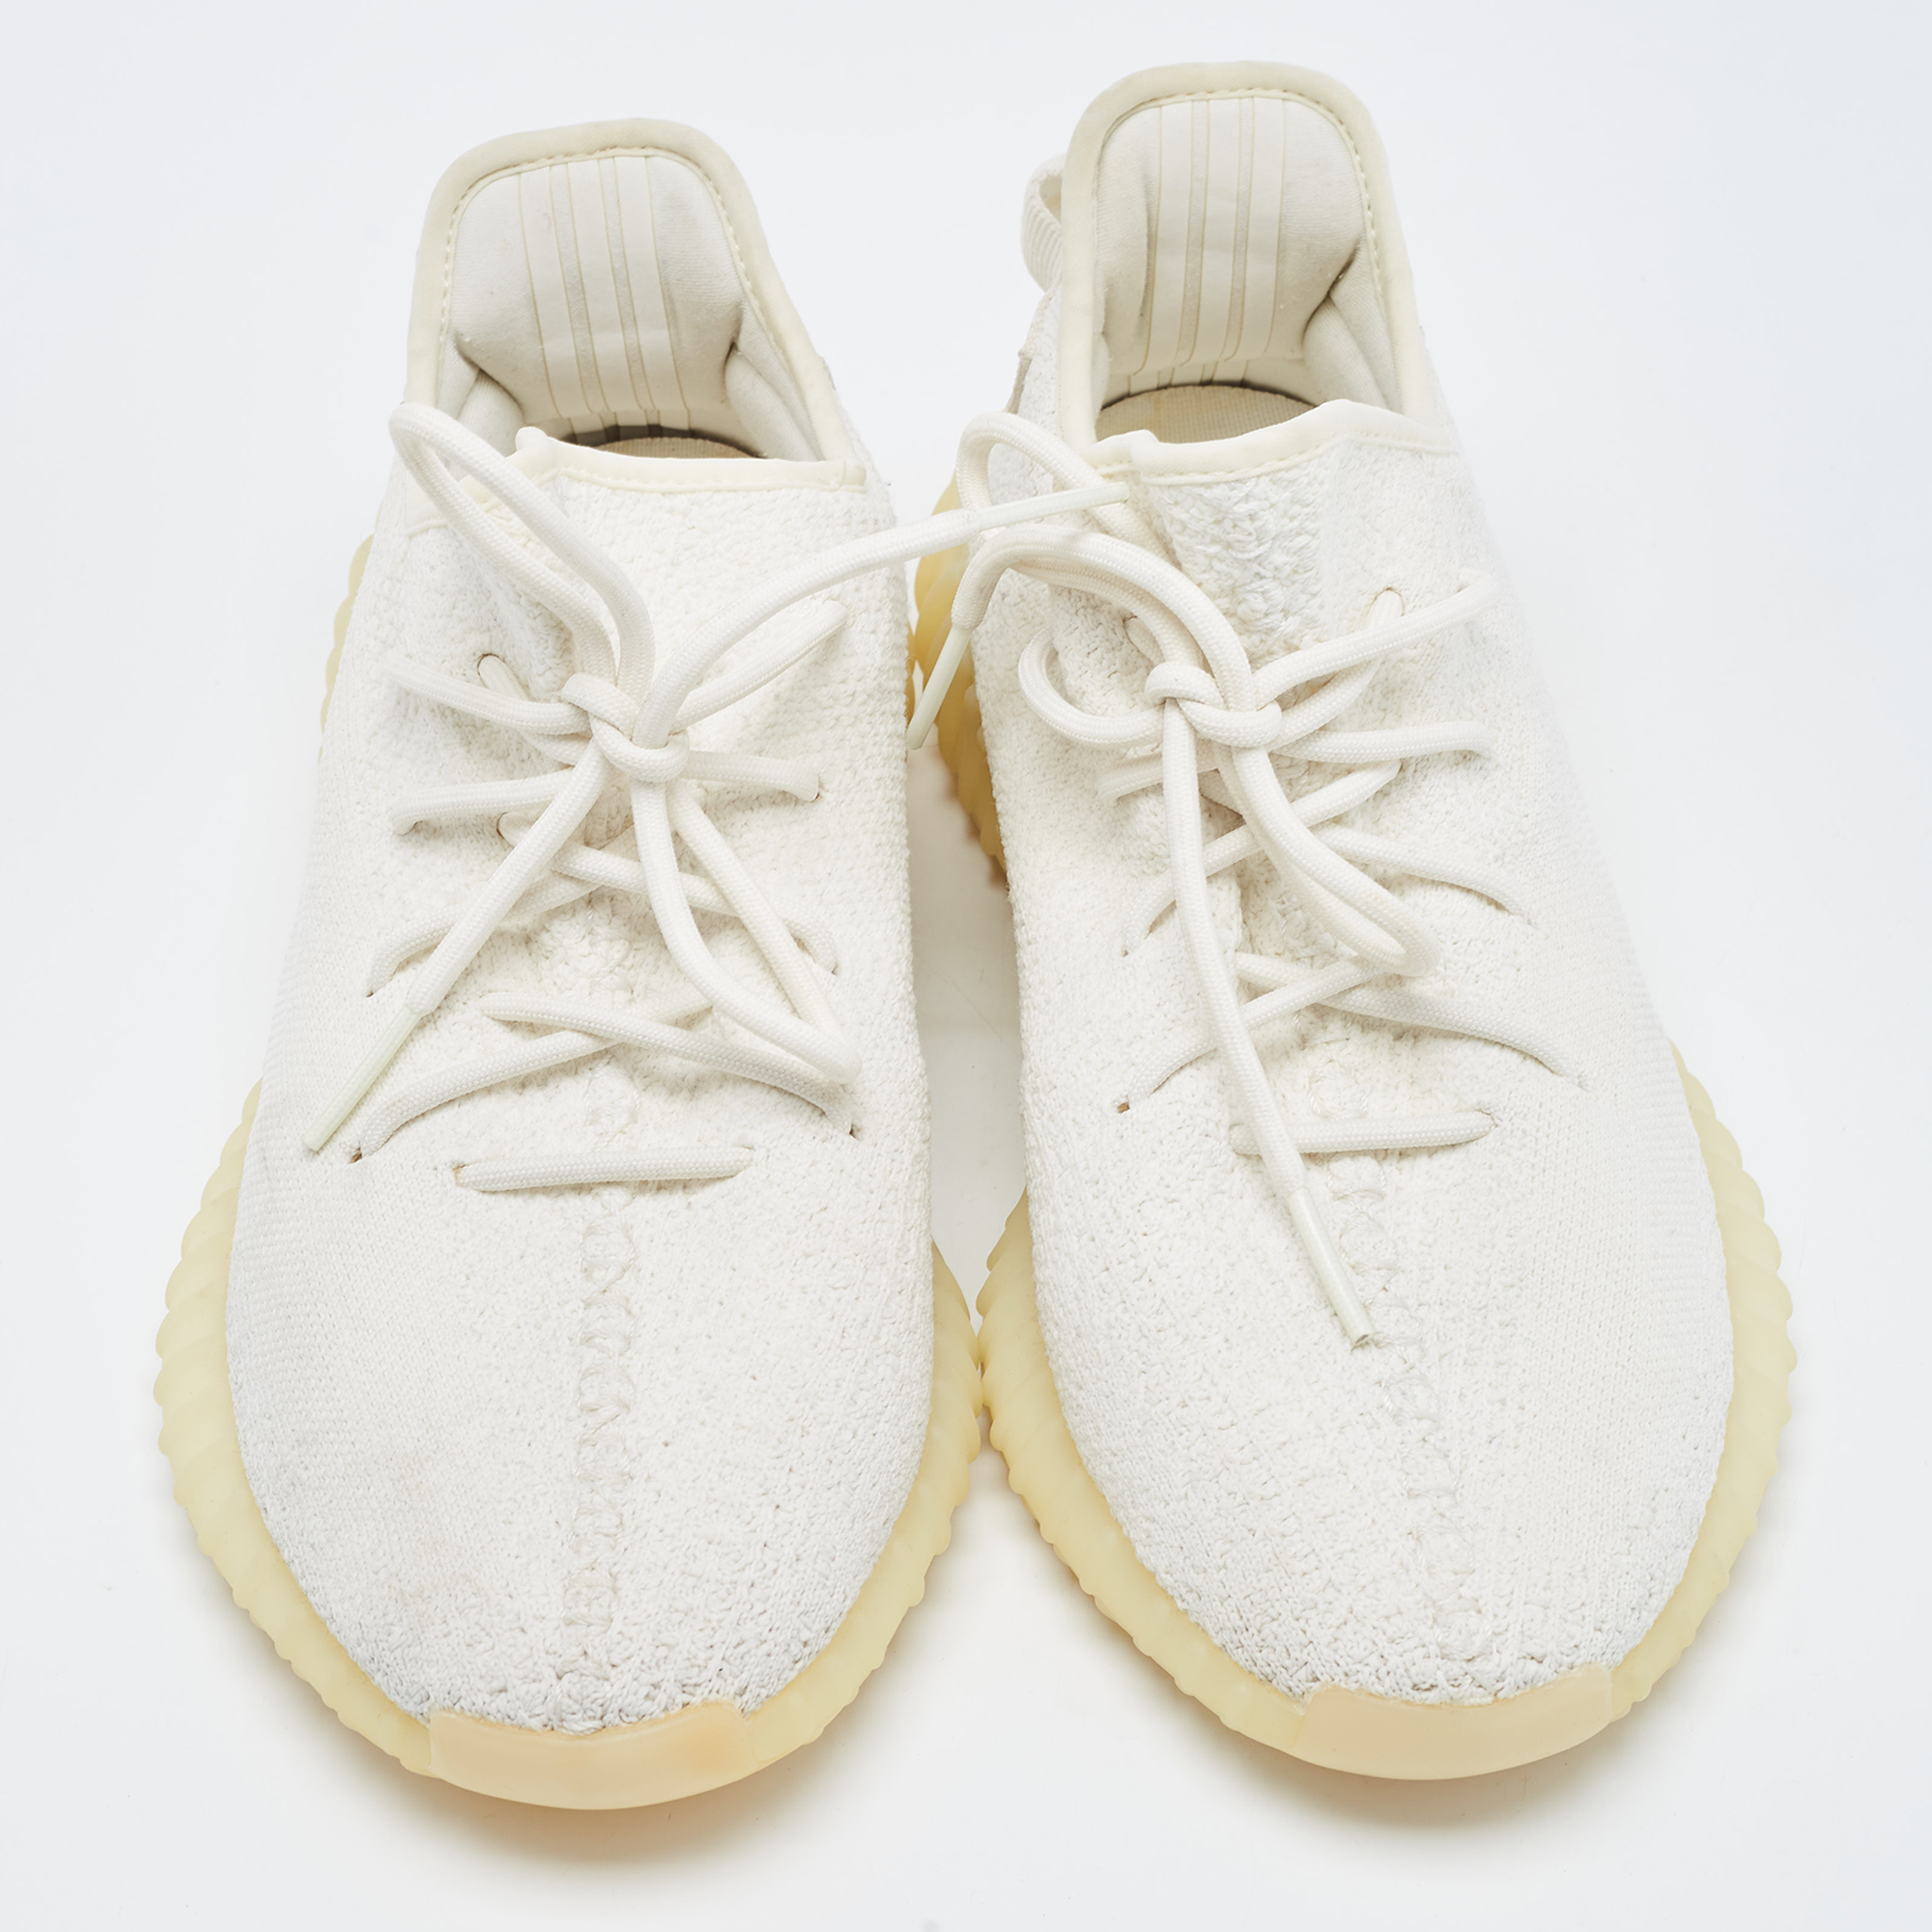 Yeezy X Adidas White Knit Fabric Boost 350 V2 Cream Sneakers Size 46